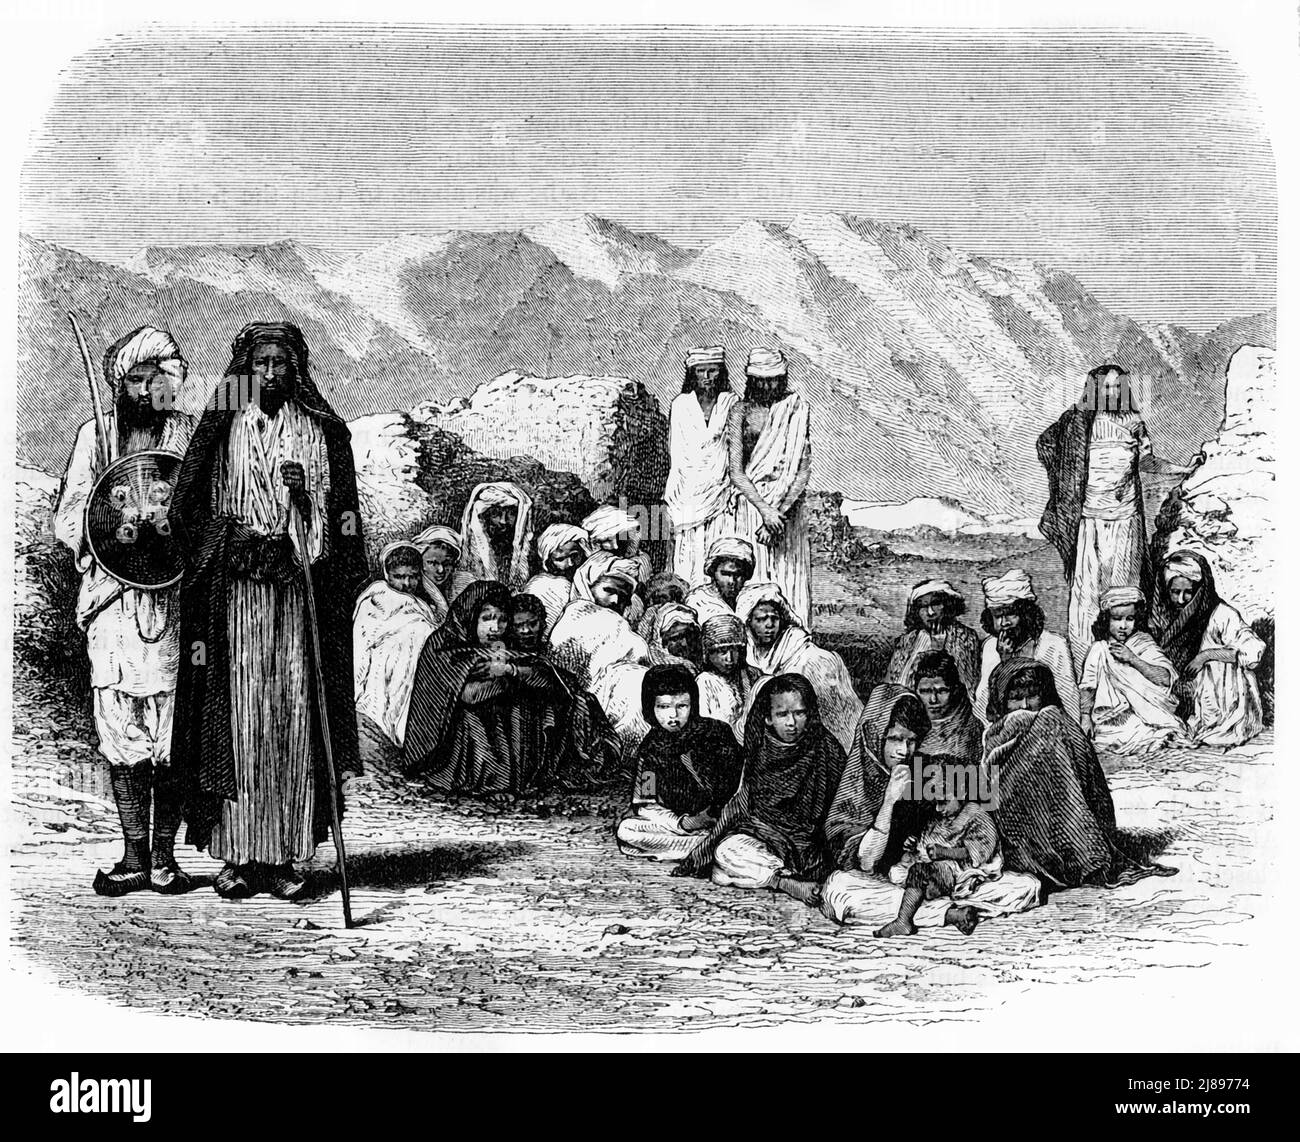 'Mountaineers of Afghanistan', c1891. From &quot;Cassell's Illustrated History of India Vol. I.&quot;, by James Grant. [Cassell Petter &amp; Galpin, London, Paris and New York] Stock Photo